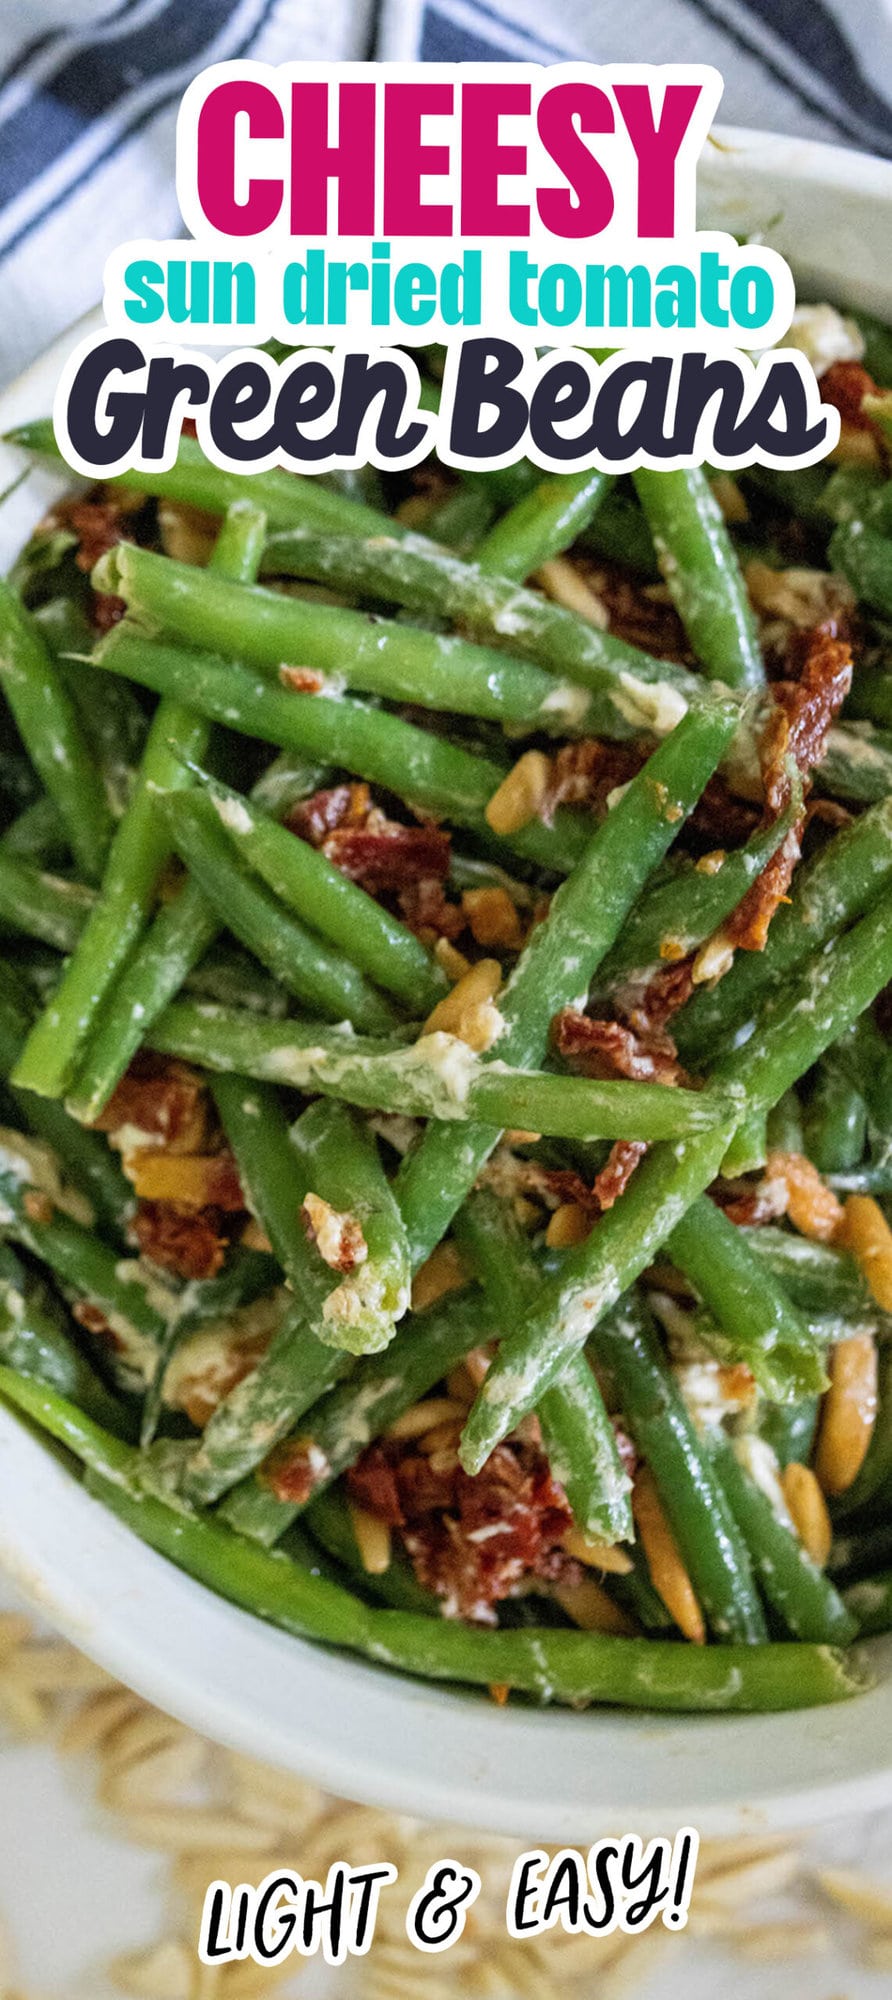 Baked green beans with a cheesy and sun-dried tomato twist.